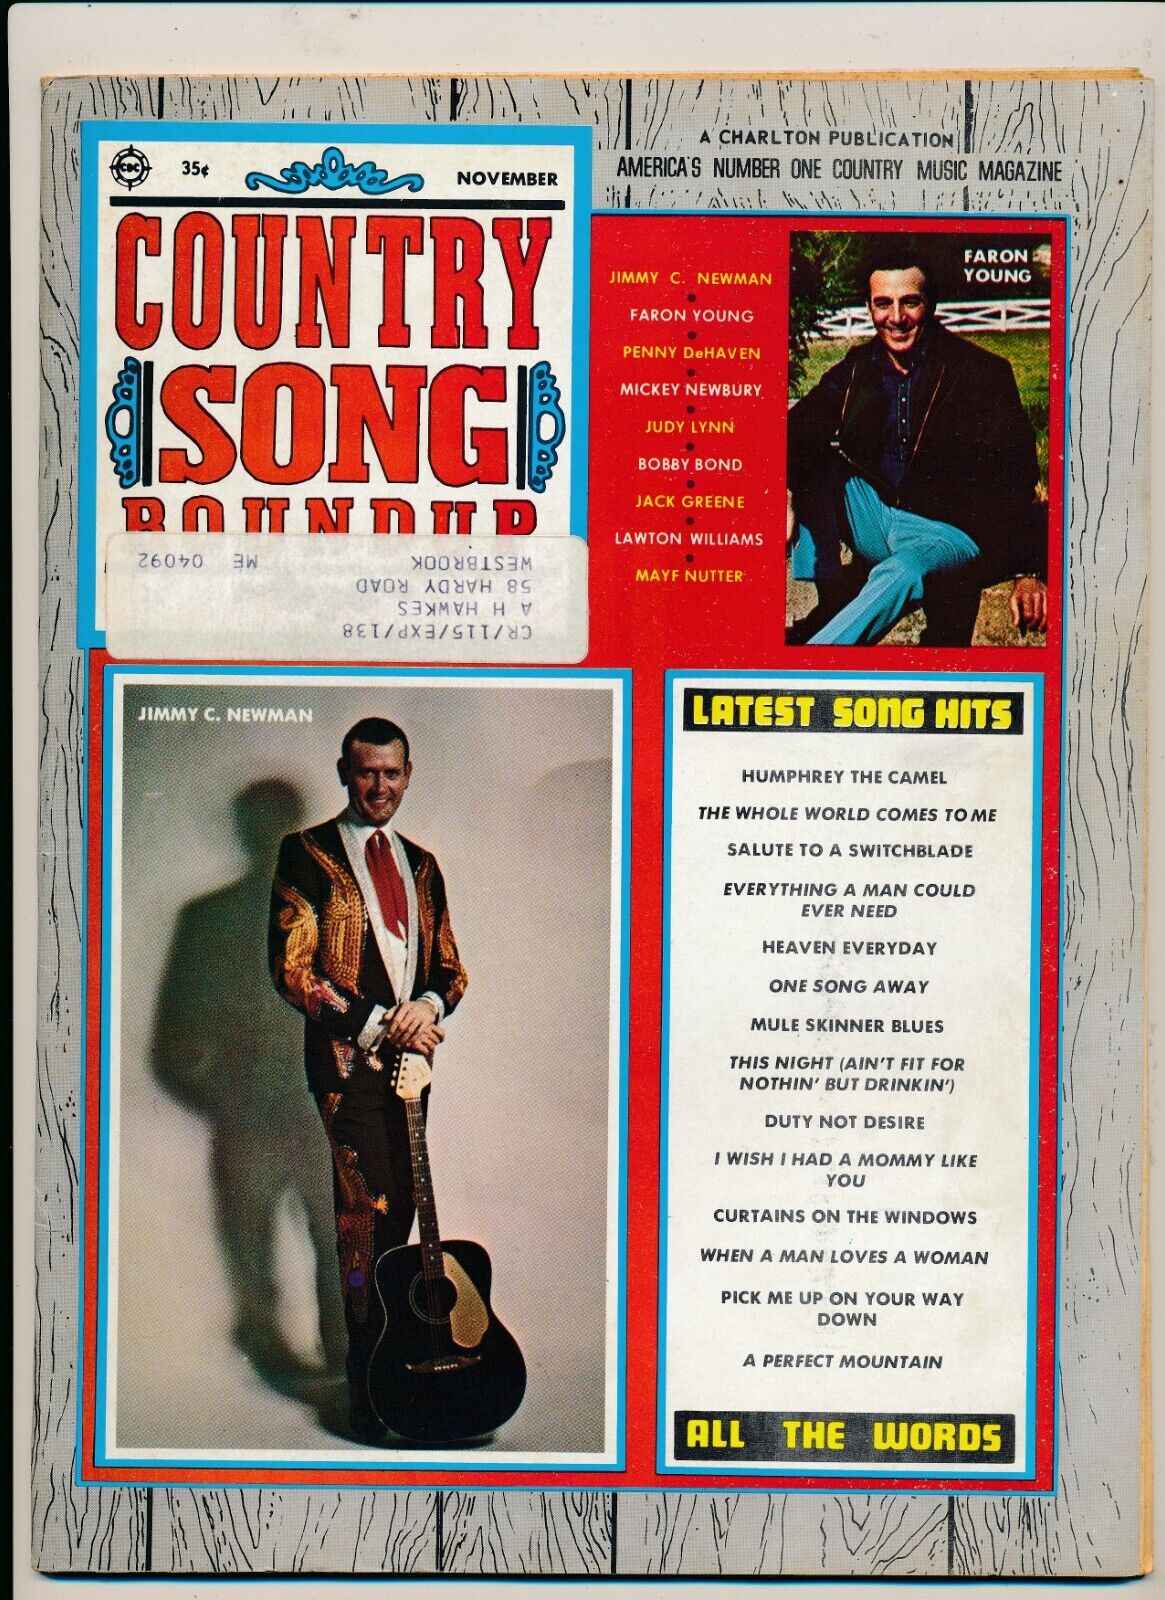 Country Song Roundup # 136 Nov. 1970 Jimmy C. Newman, Faron Young, Penny DeHaven